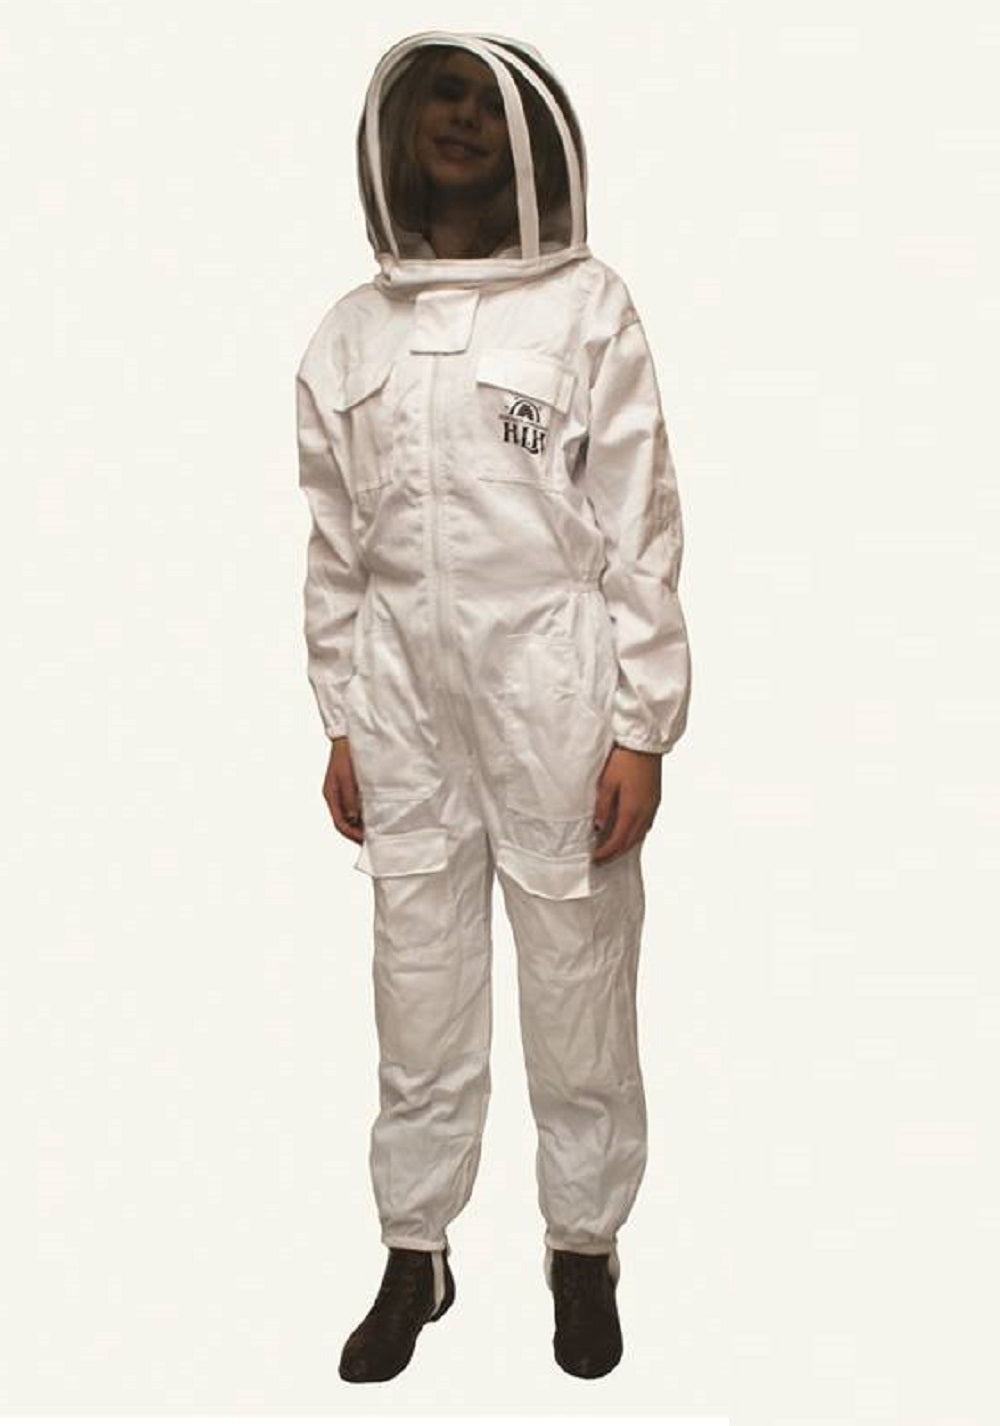 Harvest Lane Honey CLOTHSXXL-101 Beekeeper Suit with Protective Hood, Adult XX-Large